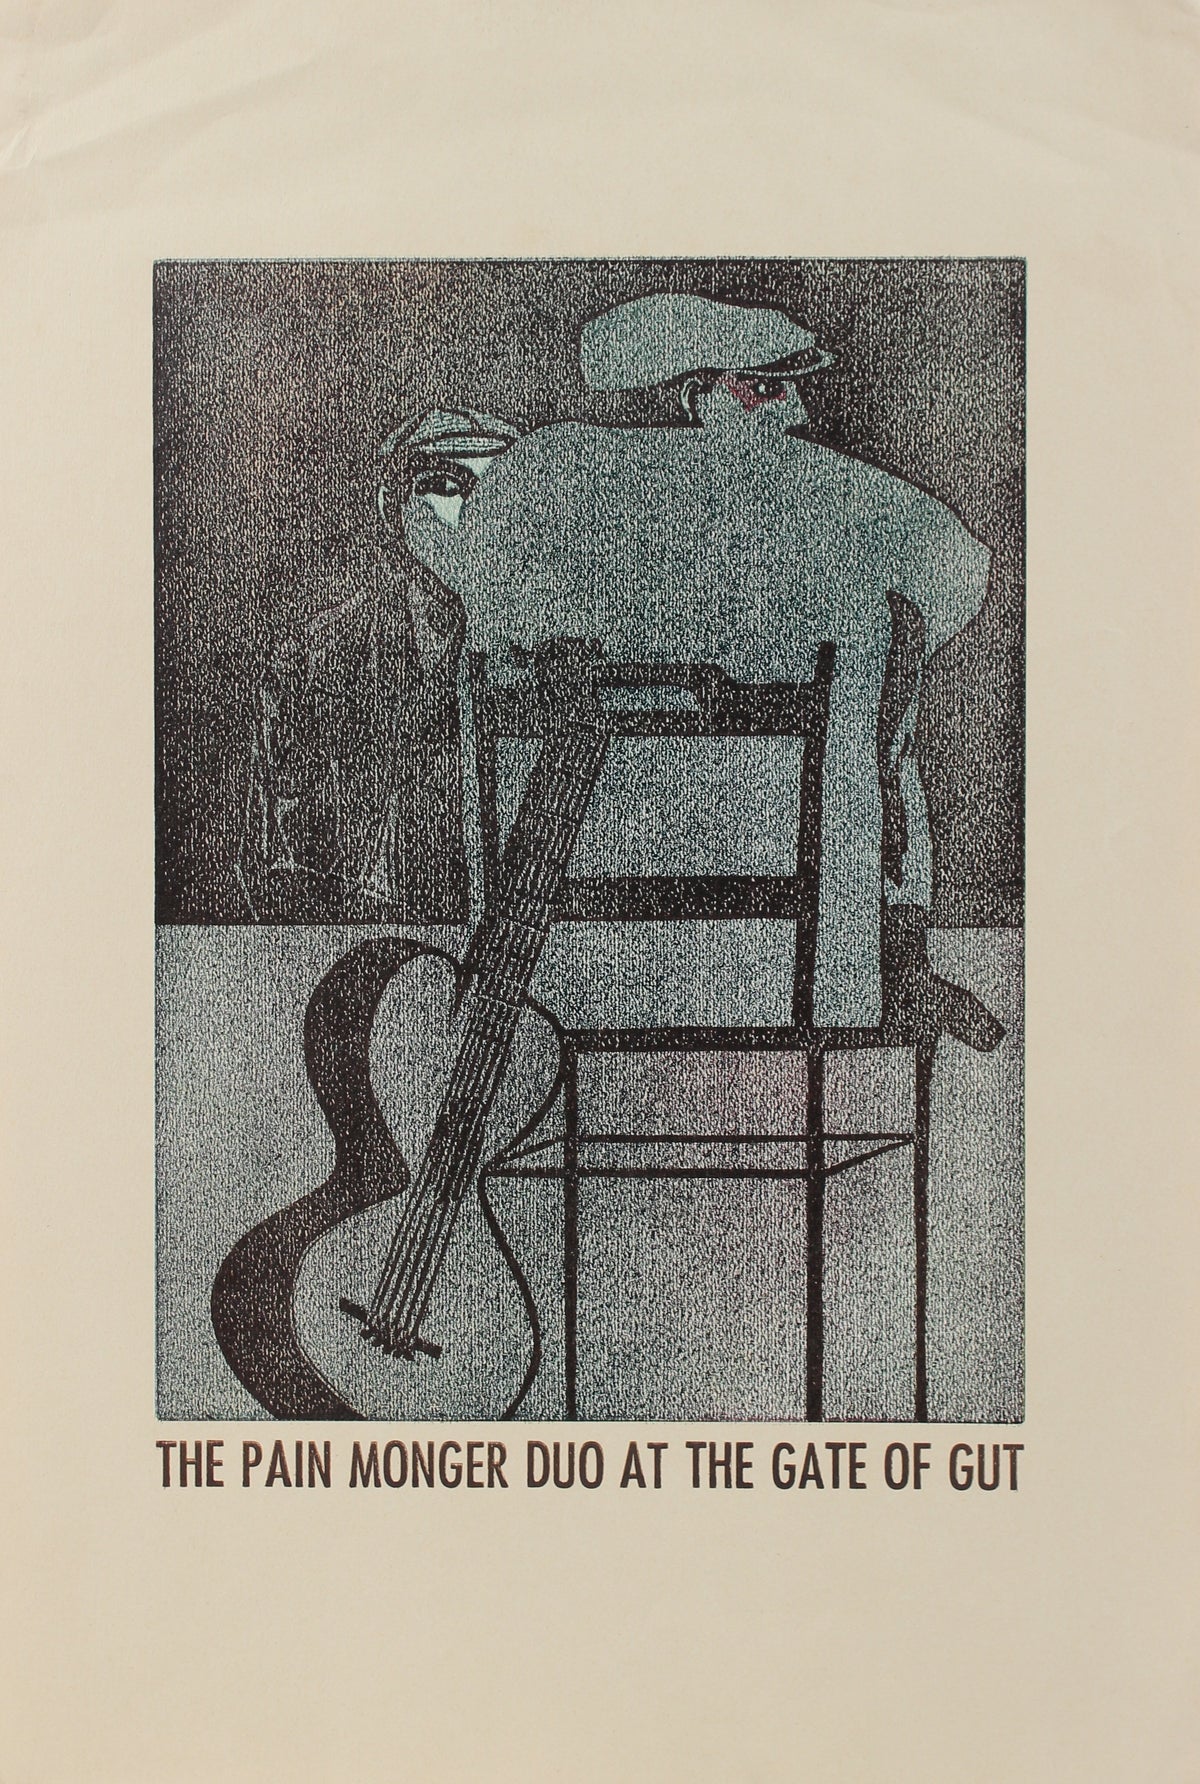 &lt;i&gt;The Pain Monger Duo at the Gate of Gut&lt;/i&gt;&lt;br&gt;1960-70s Serigraph&lt;br&gt;&lt;br&gt;#A0438